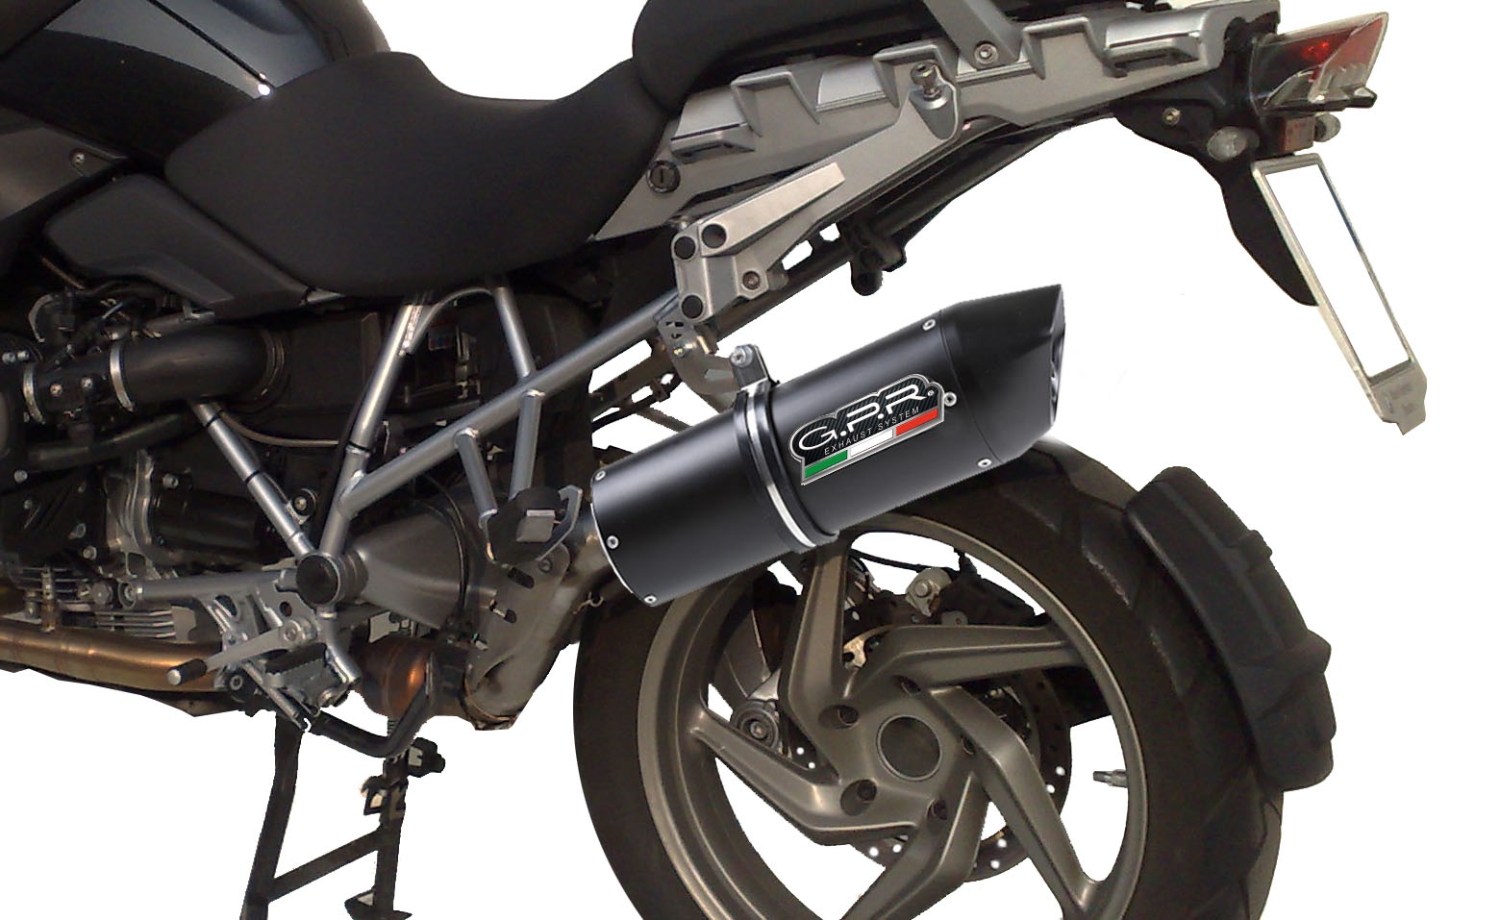 GPR exhaust compatible with  Bmw R1200GS - Adventure 2010-2012, Furore Nero, Slip-on exhaust including removable db killer and link pipe 